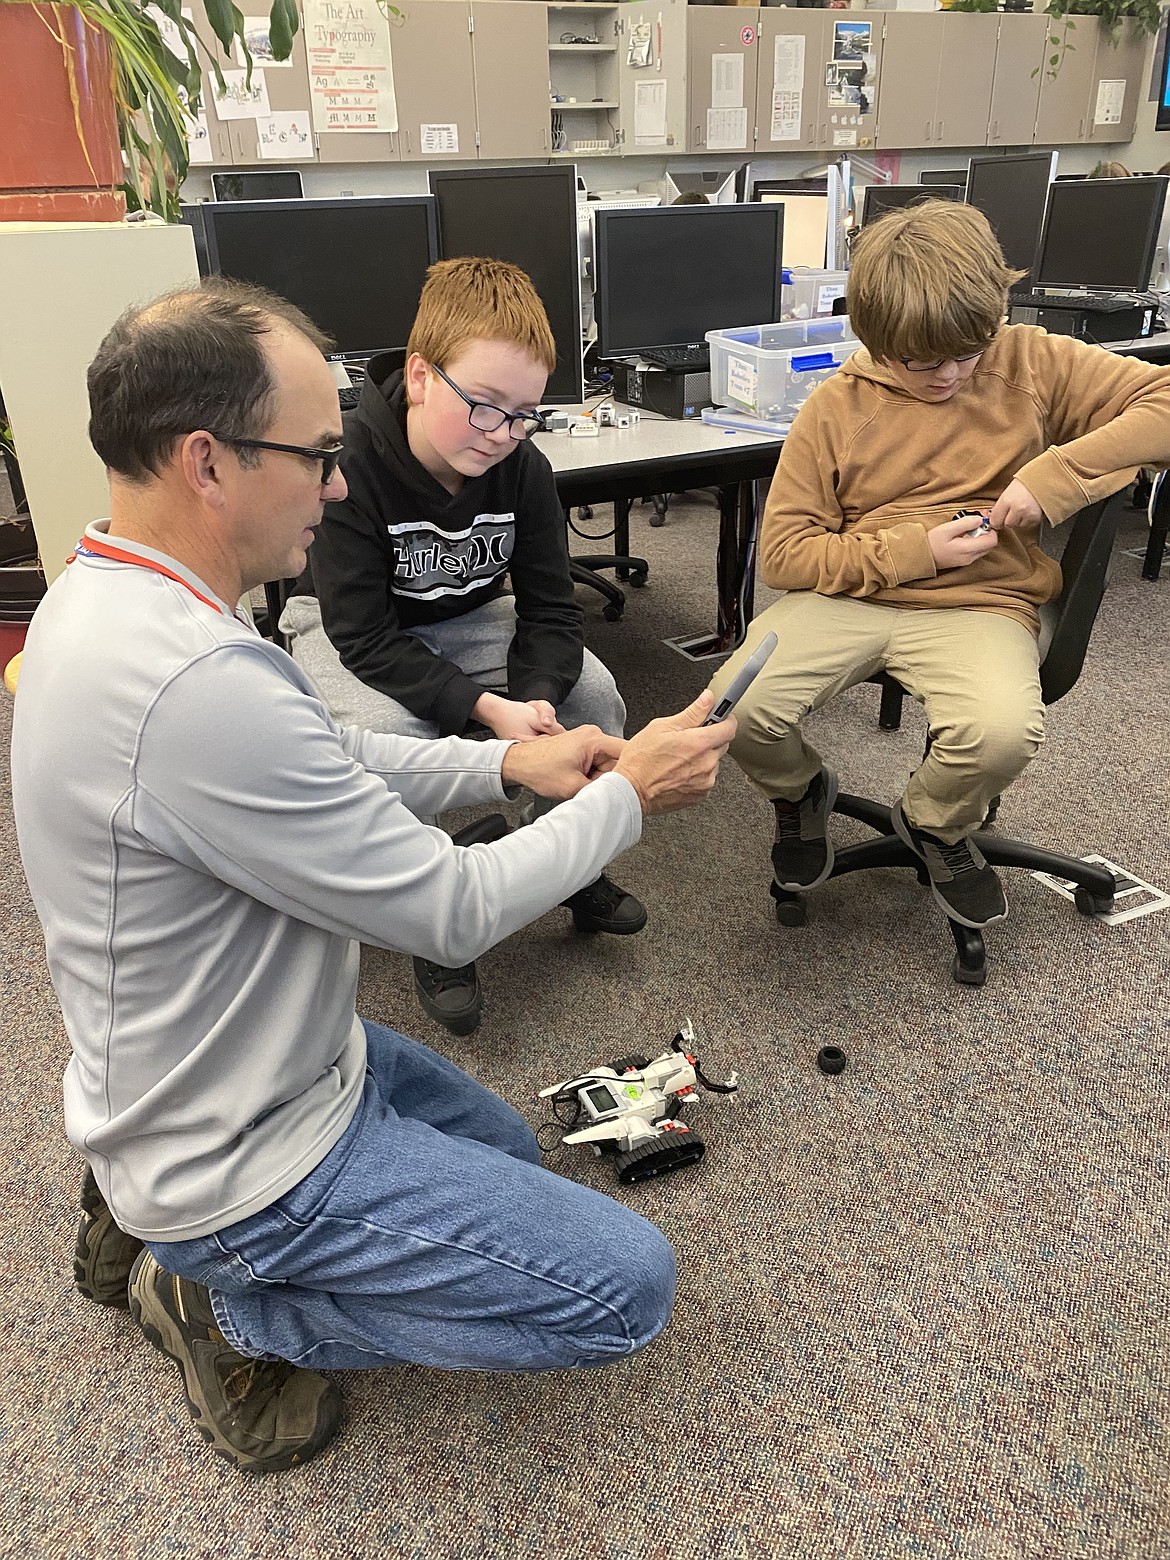 Friday at River City Middle School, sixth grade teacher Kevin Hauck goes over the technicalities of a robotics project with students, from left: Dylan Rounsville, 12 and Ethan Palmer, 11.